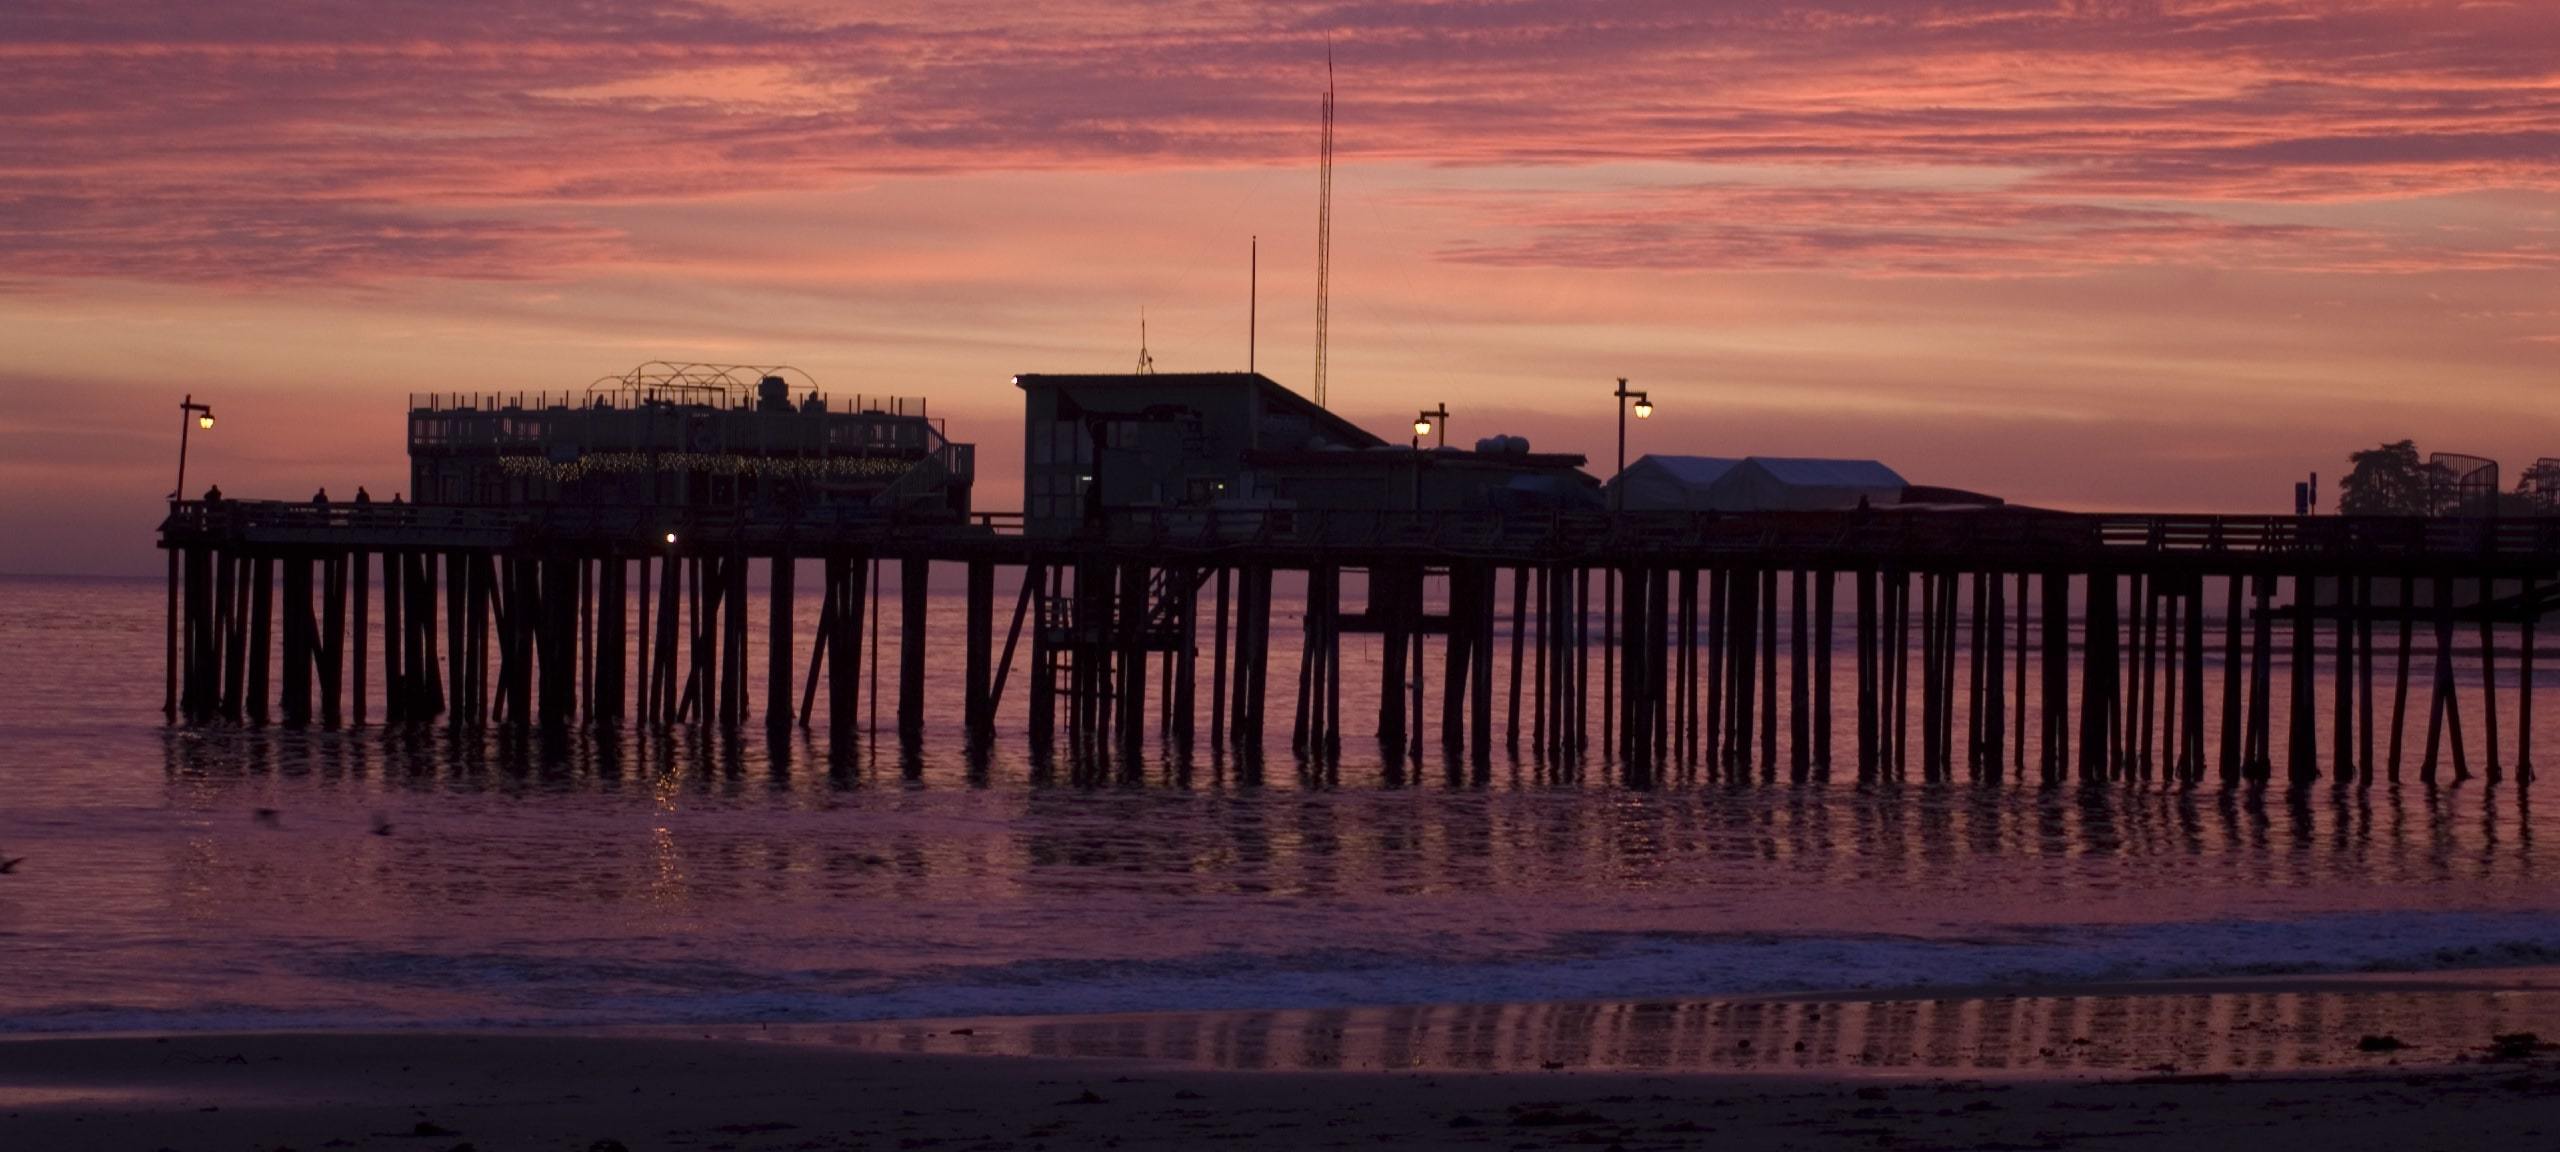 Pink sunset and silhouette of Capitola, CA pier